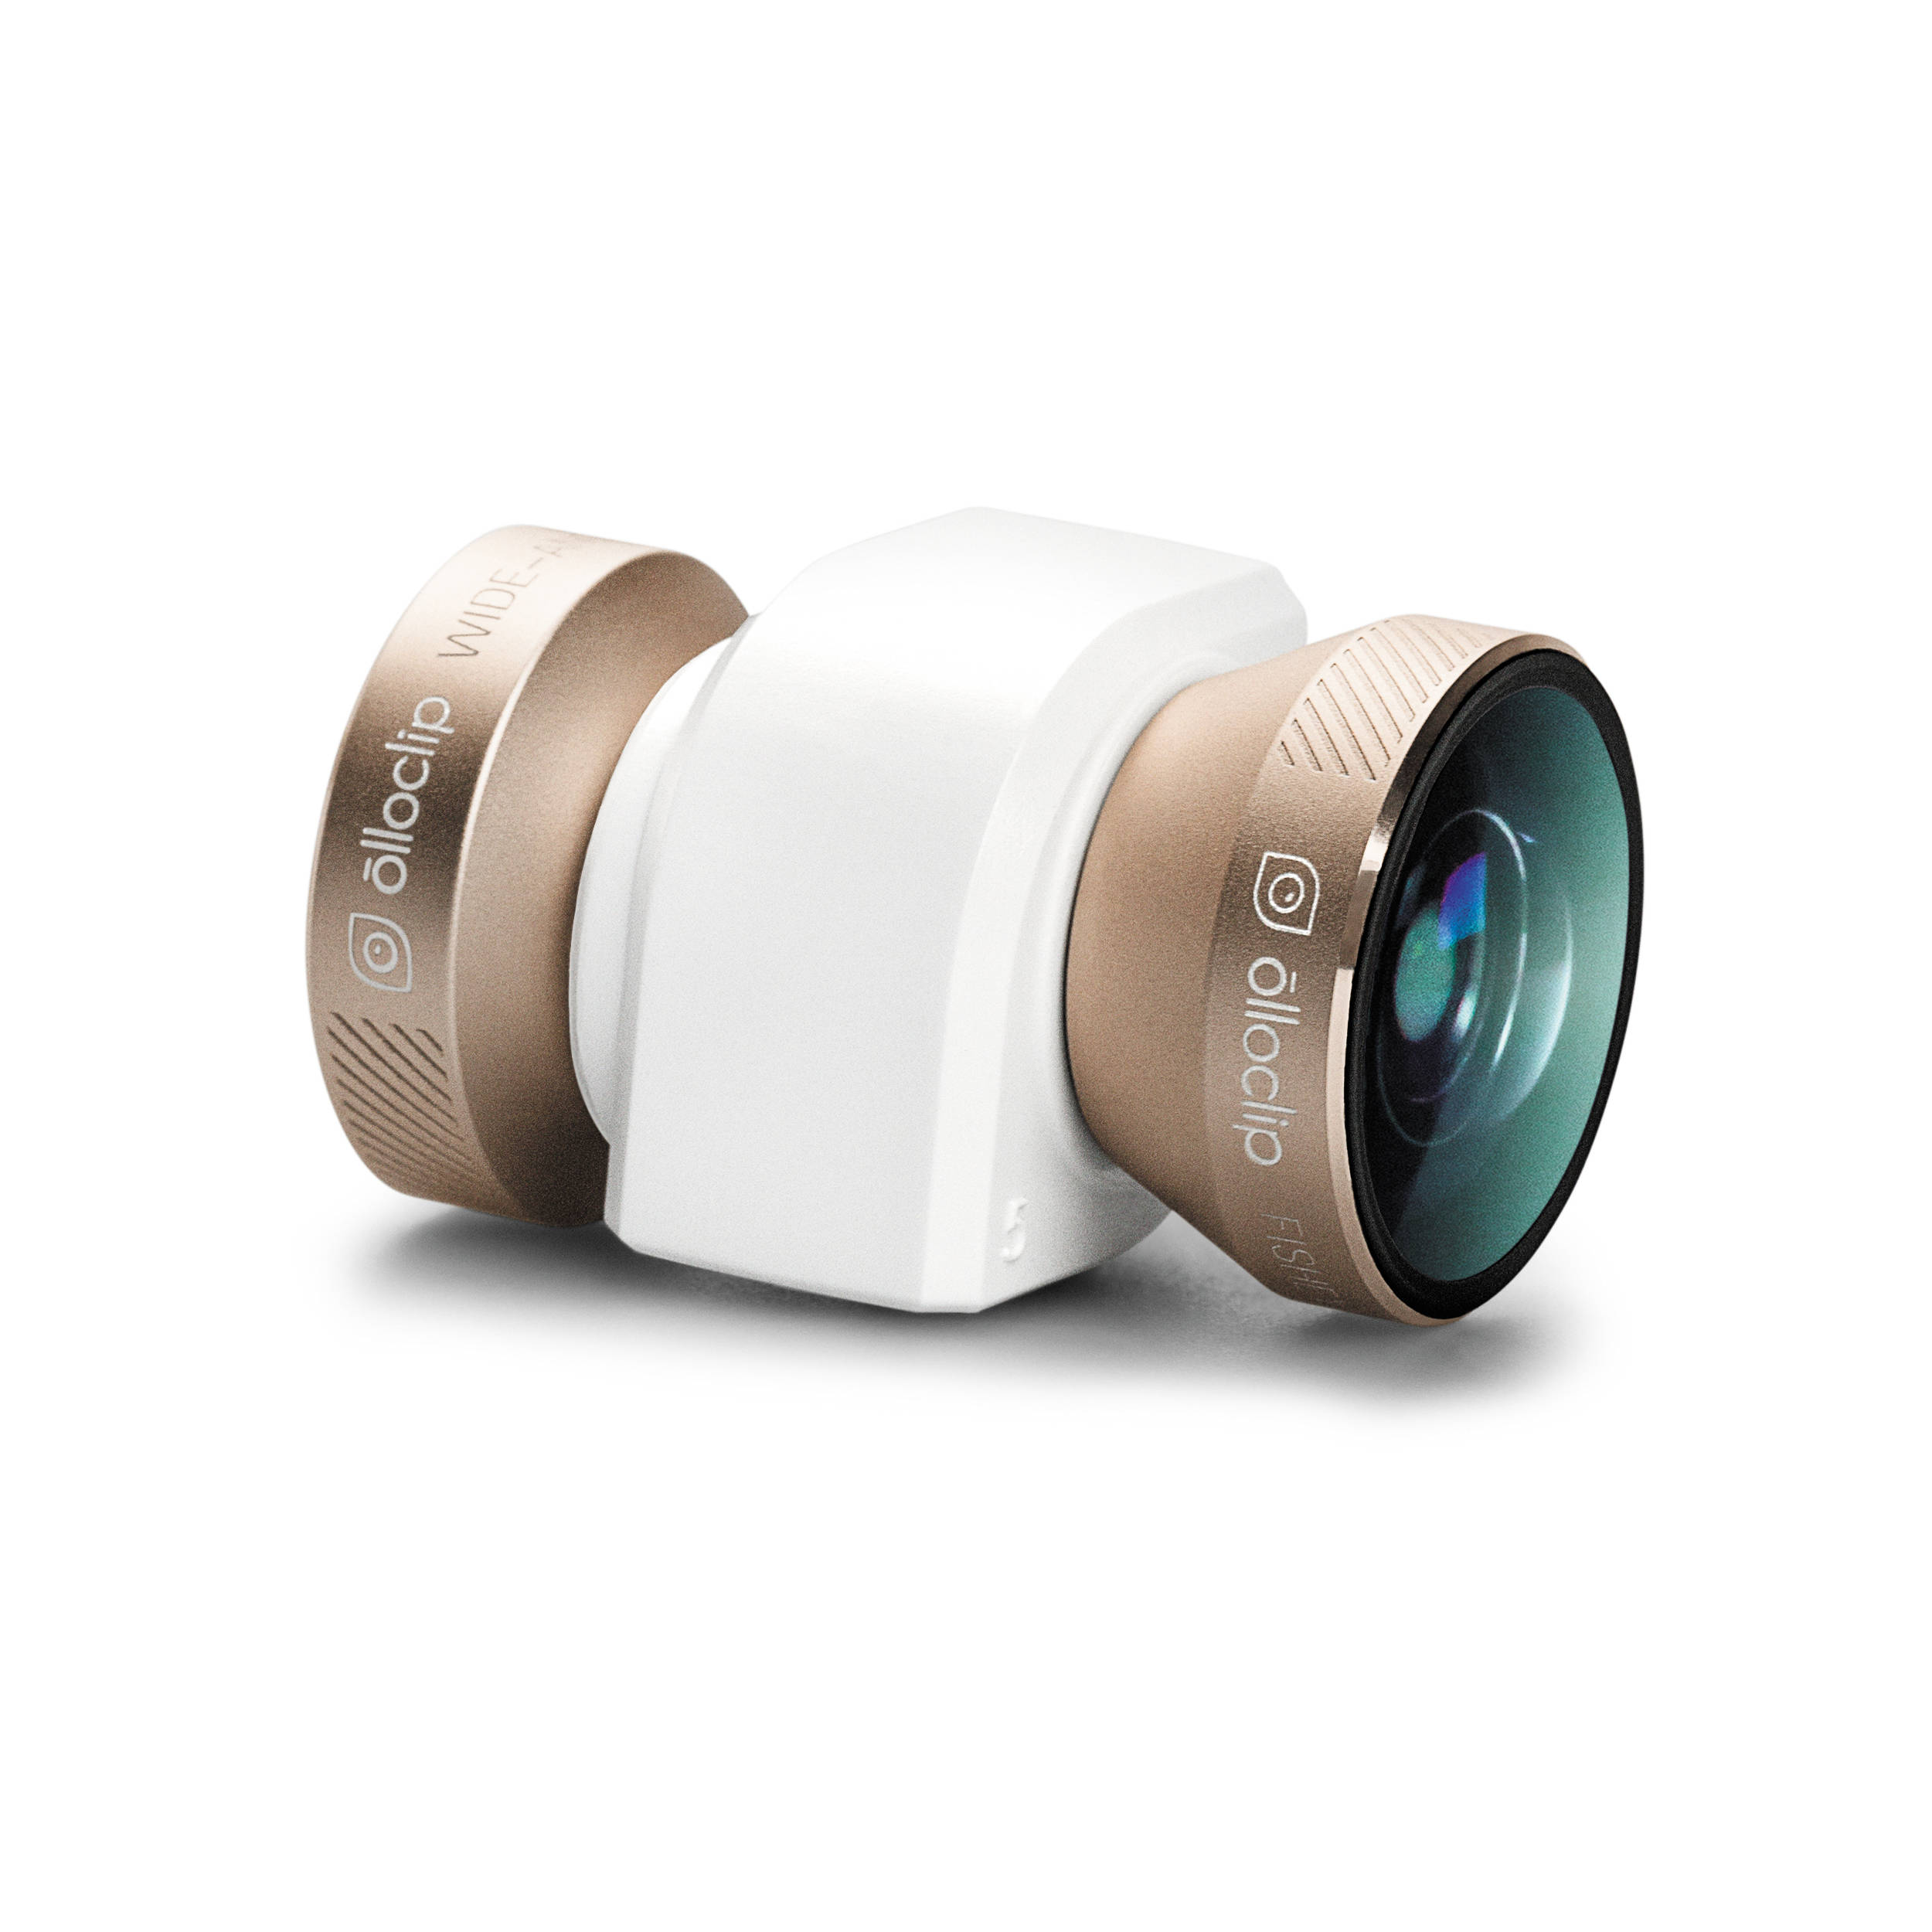 Olloclip 4 In 1 Photo Lens For Iphone 5 5s Se Oceu Iph5 Fw2m Gdw